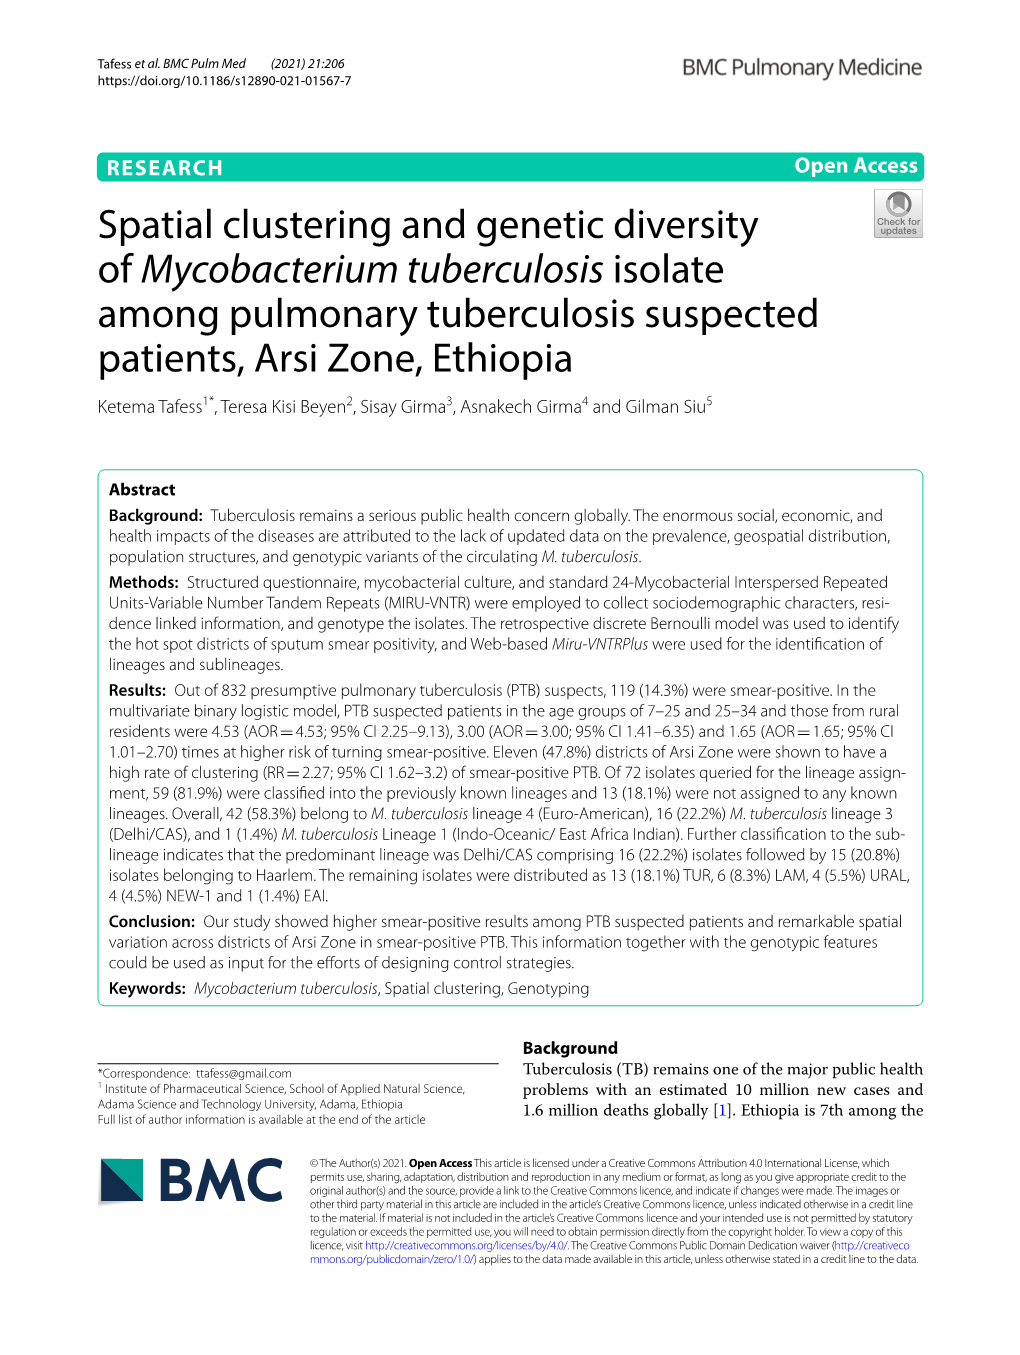 Spatial Clustering and Genetic Diversity Of